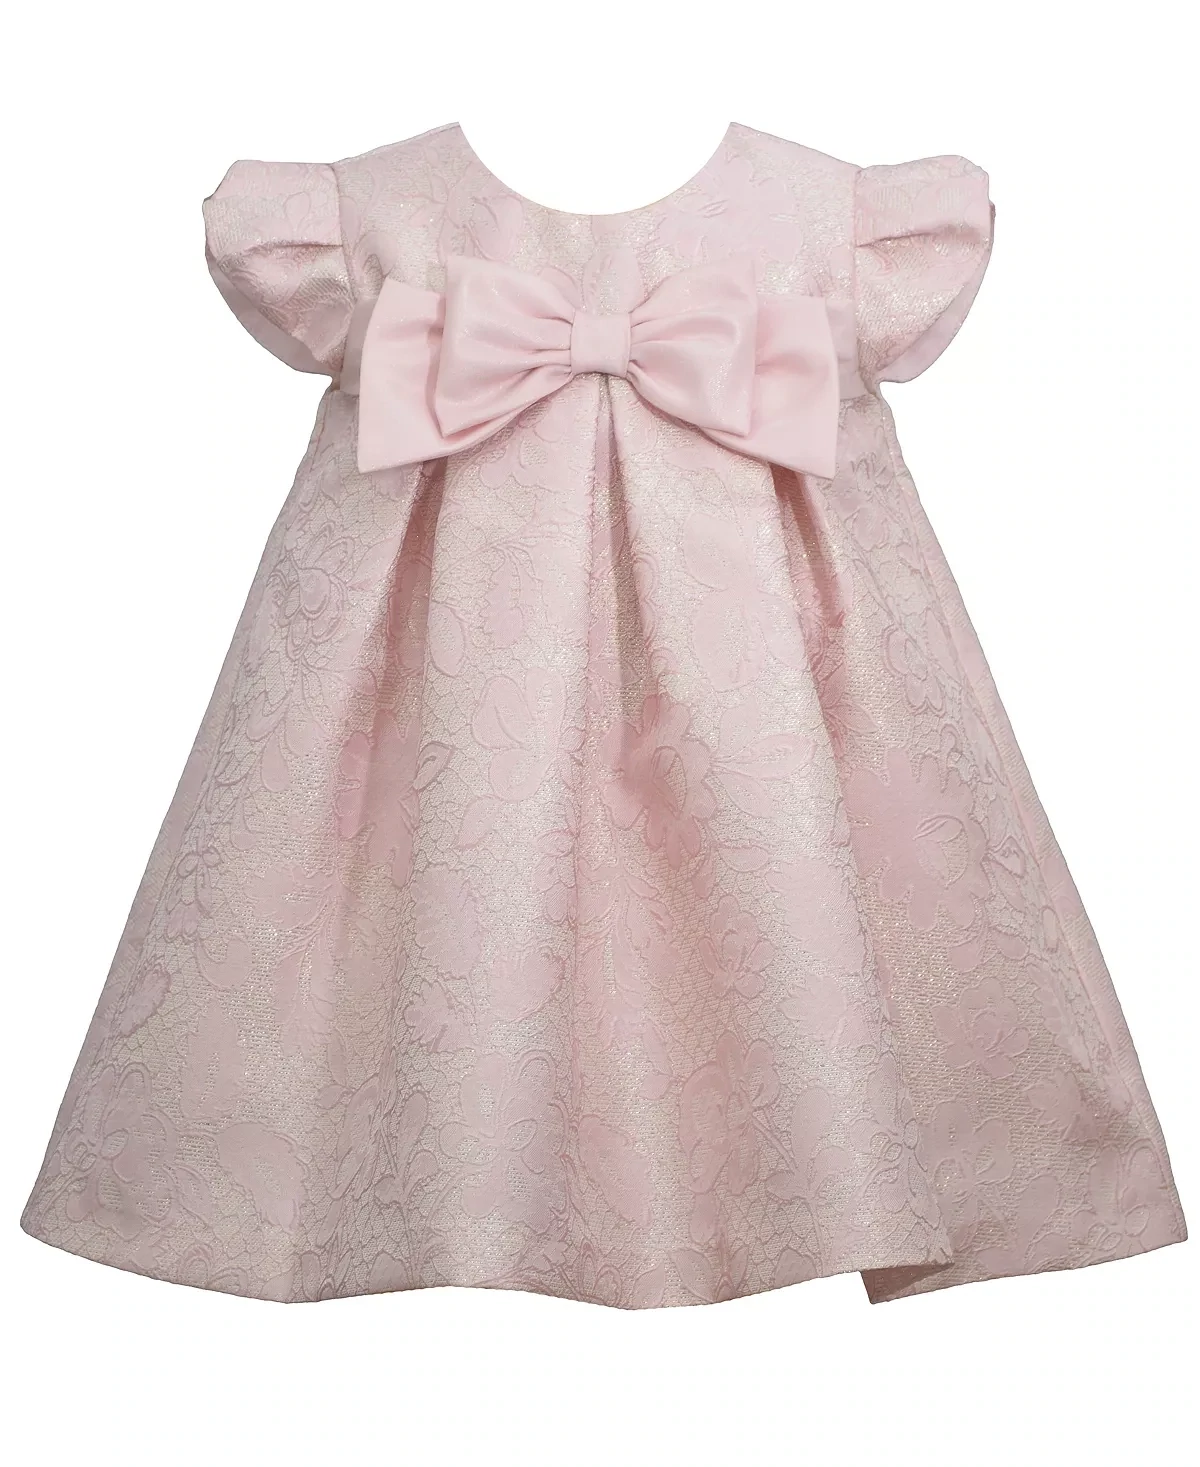 Bonnie Baby Girls Short Sleeved Bow Tie Jacquard Pleated Float Dress with Panty, Size 3/9 Months